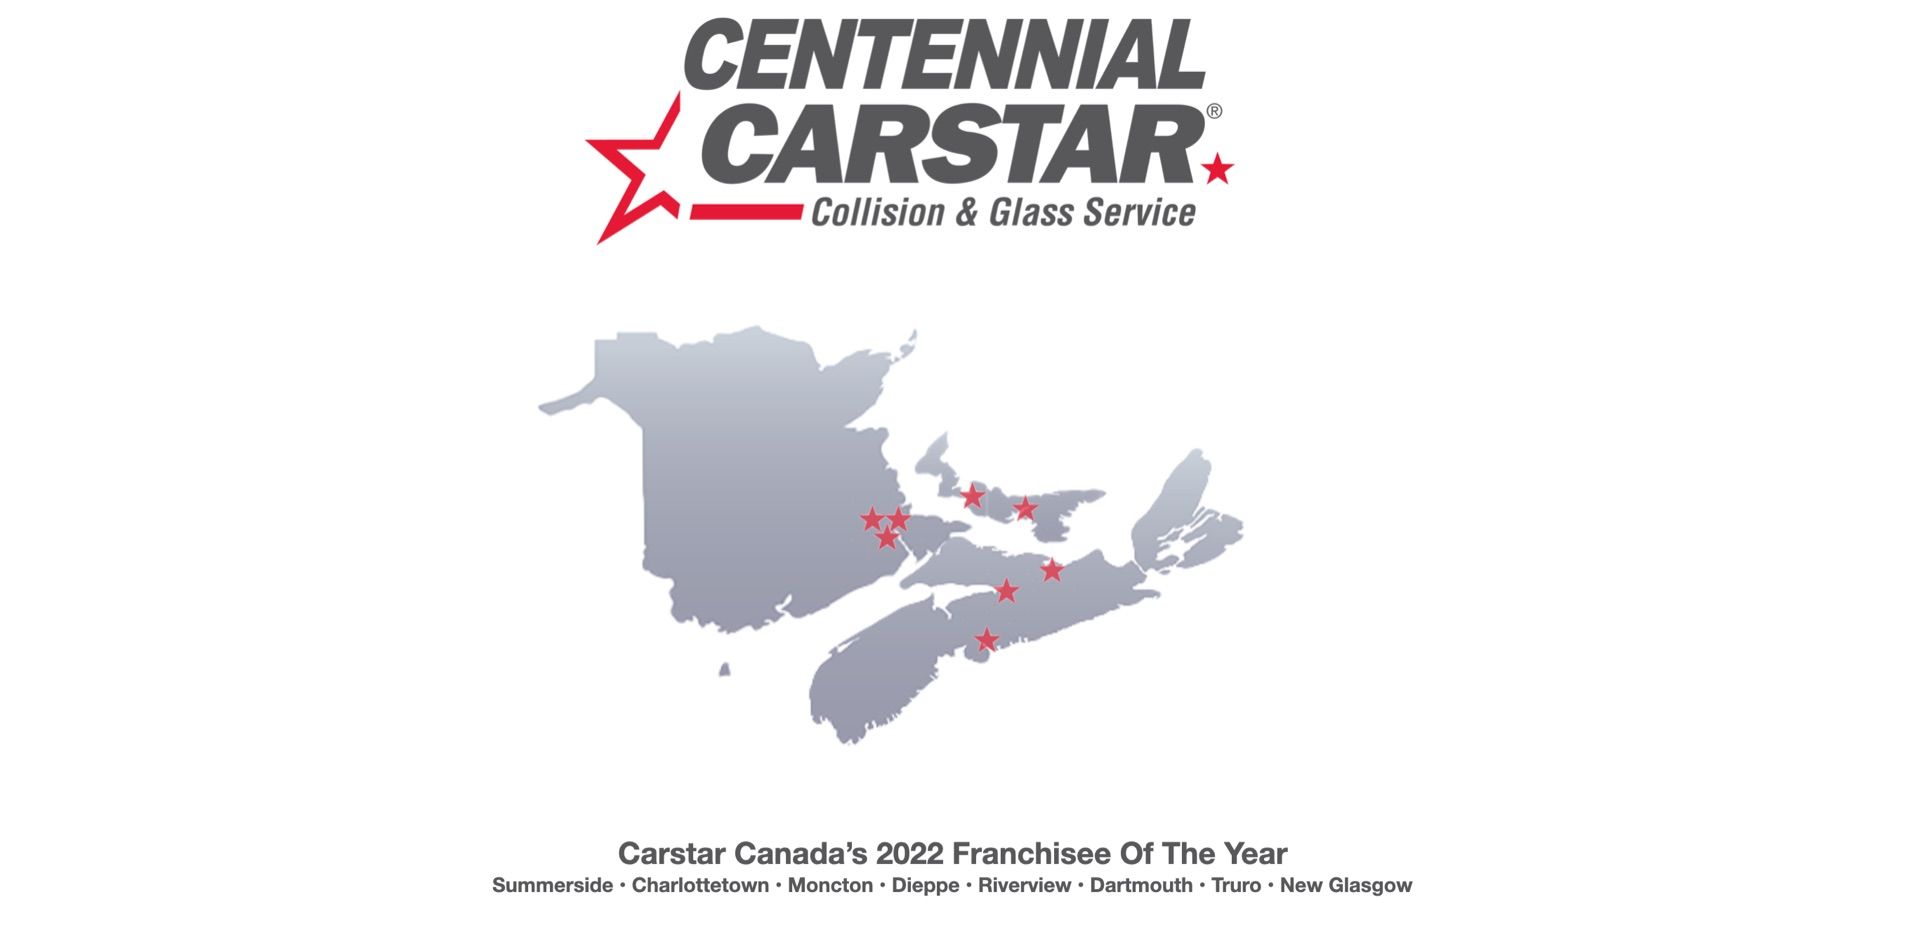 Expansion Alert: Centennial Carstar Adds Seventh And Eighth Locations In Nova Scotia